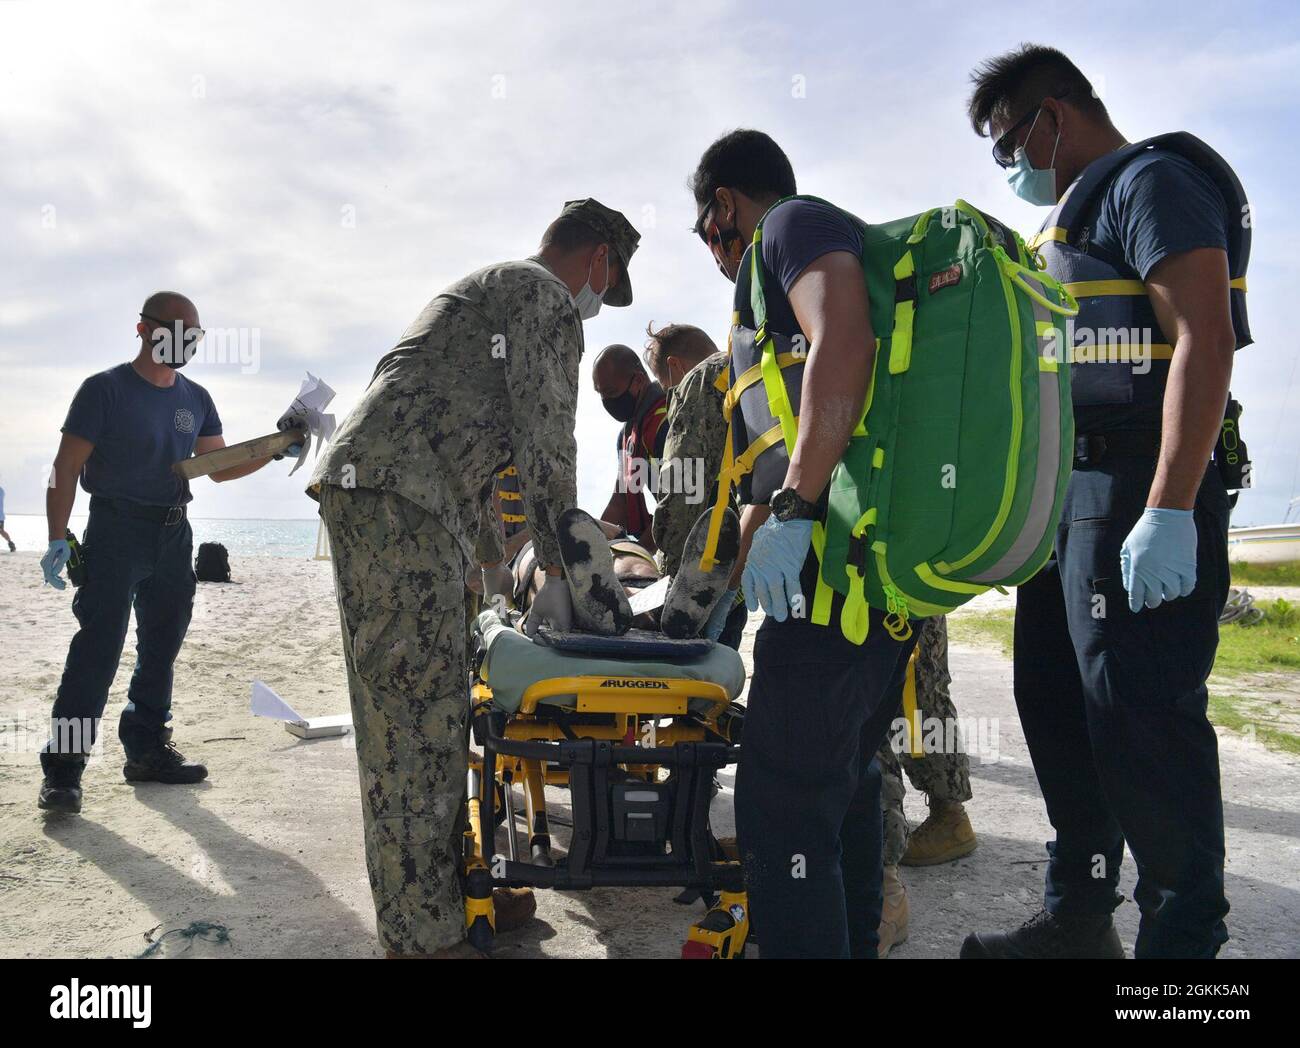 DIEGO GARCIA, British Indian Ocean Territory (May 12, 2021) – U.S. Navy Sailors along with first responders carry a wounded shark attack victim with a stretcher and place them on a gurney during a drill on Diego Garcia, May 12, 2021. U.S. Navy Support Facility Diego Garcia provides logistic, service, recreational and administrative support to U.S. and allied forces forward deployed to the Indian Ocean and Arabian Gulf. Stock Photo